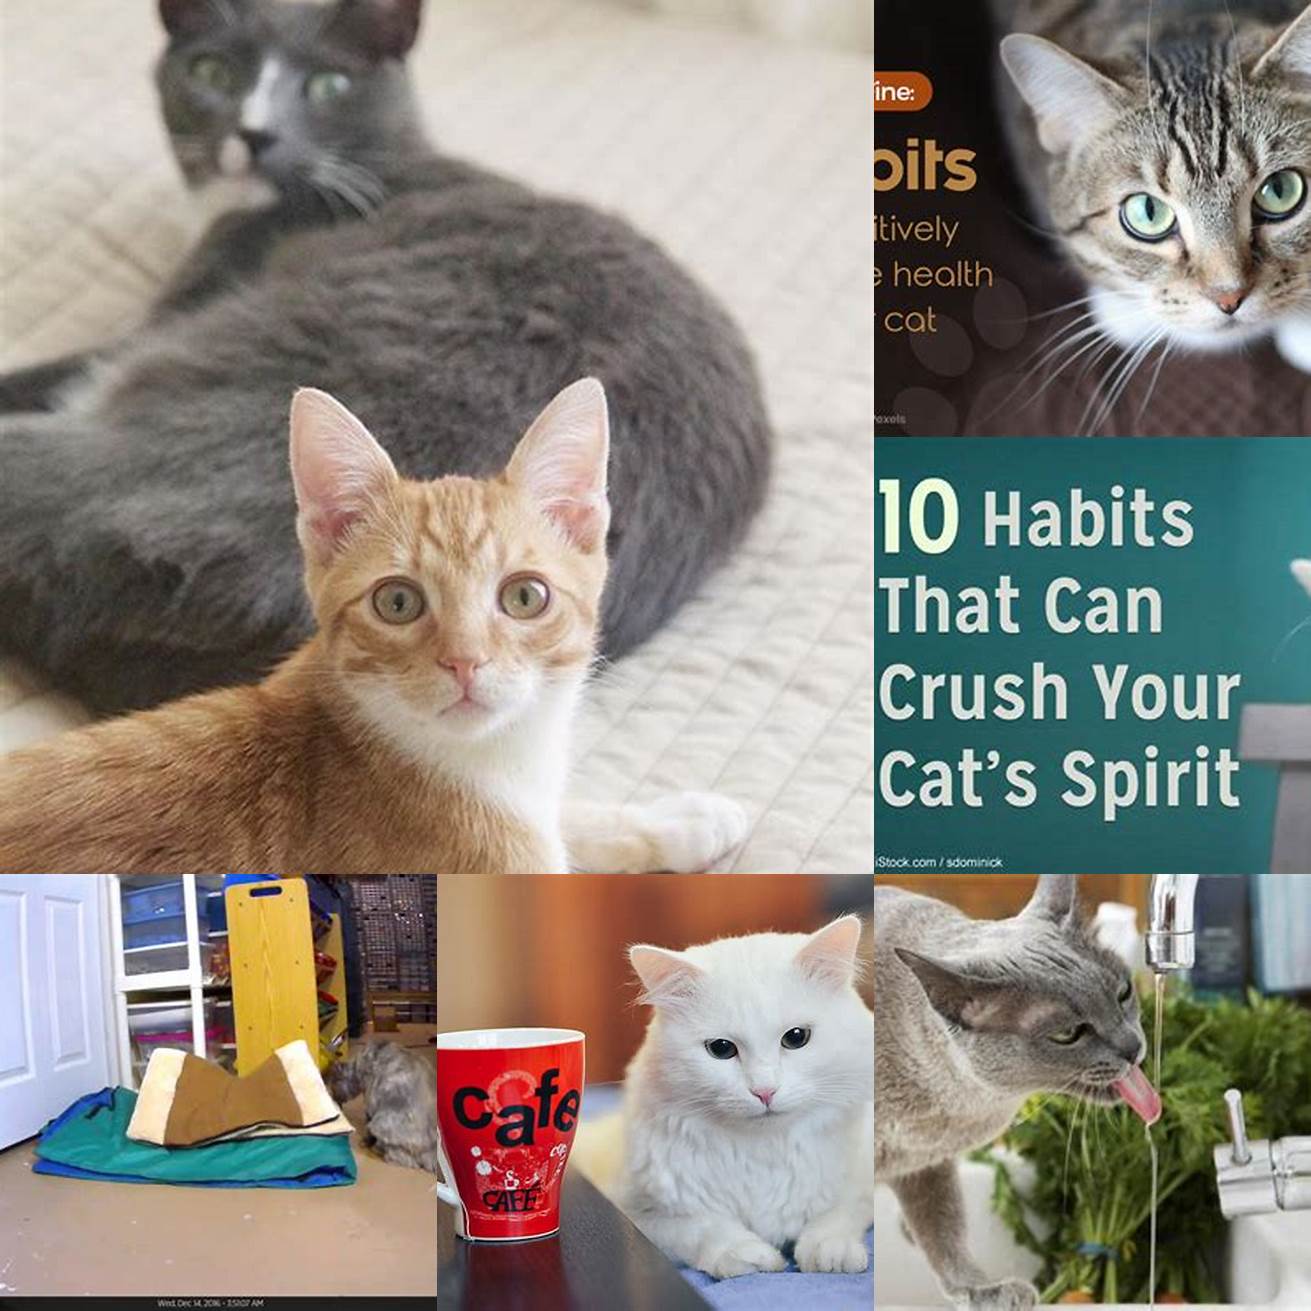 Cats are creatures of habit